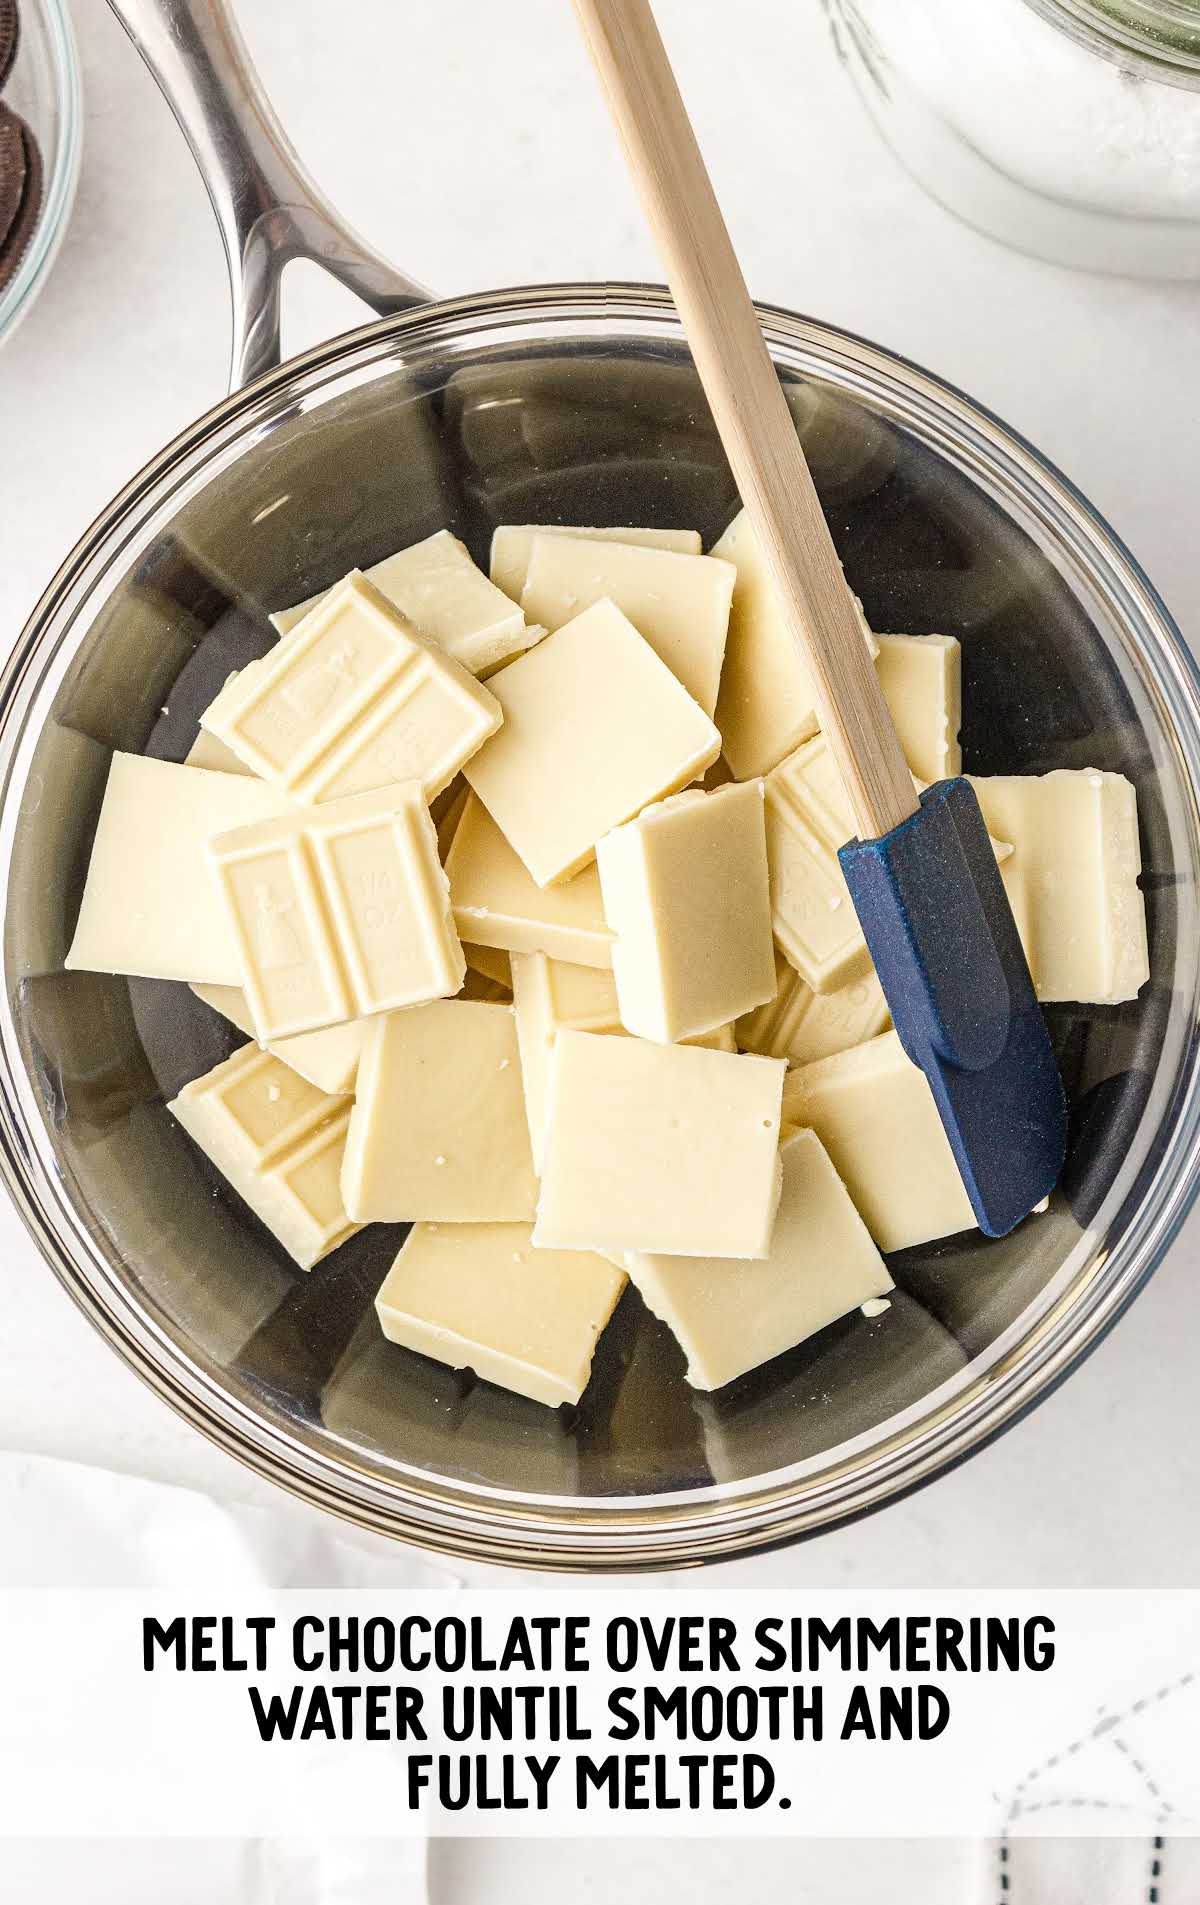 white chocolate put over the simmering water to melt